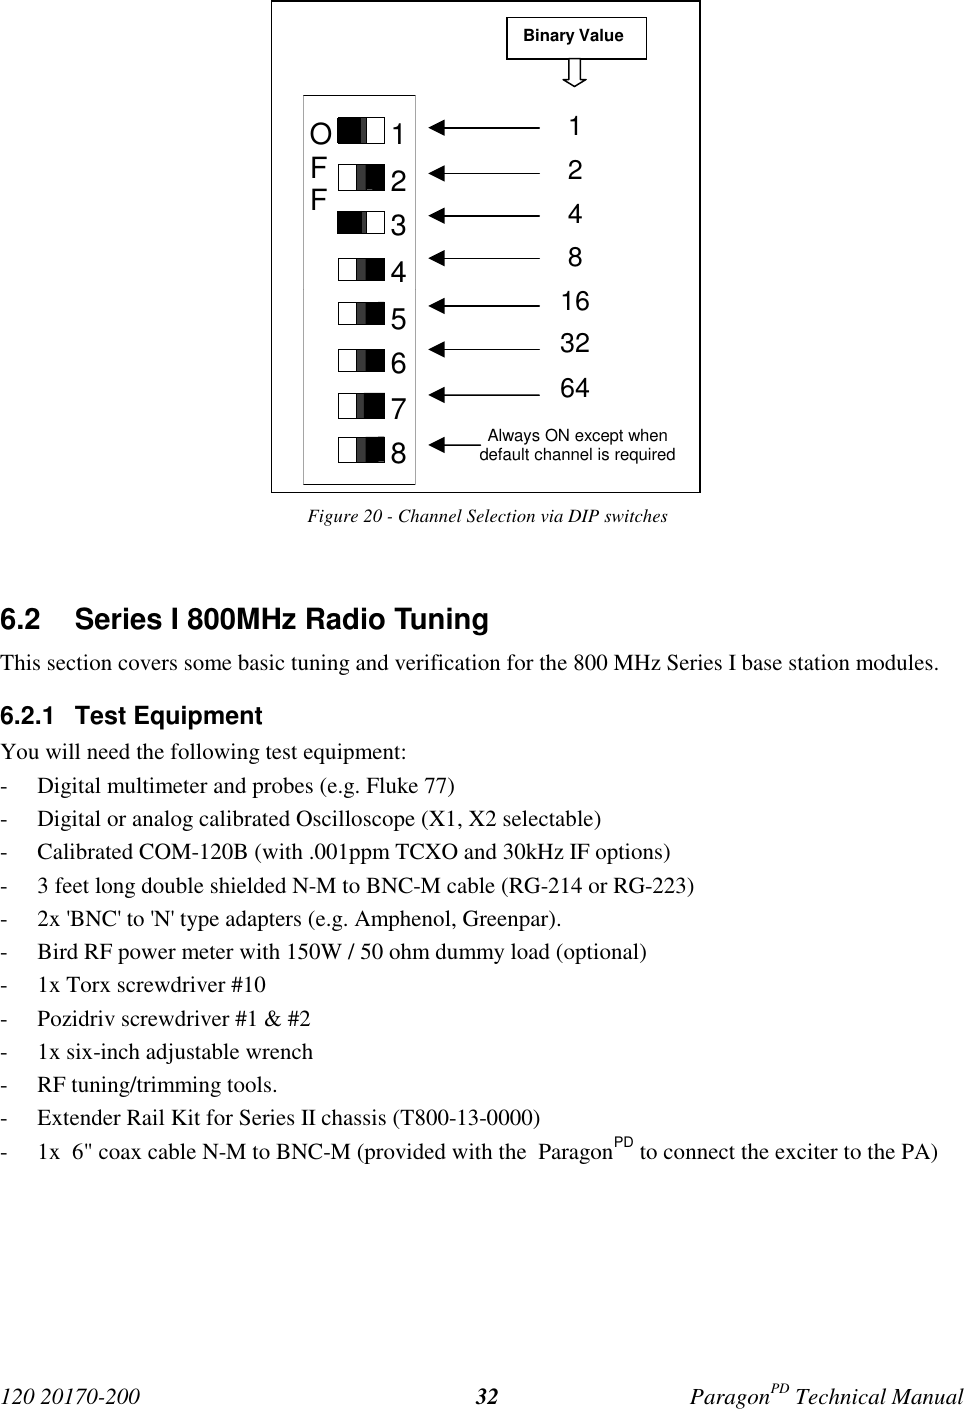 120 20170-200 ParagonPD Technical Manual32Figure 20 - Channel Selection via DIP switches6.2  Series I 800MHz Radio TuningThis section covers some basic tuning and verification for the 800 MHz Series I base station modules.6.2.1 Test EquipmentYou will need the following test equipment:- Digital multimeter and probes (e.g. Fluke 77)- Digital or analog calibrated Oscilloscope (X1, X2 selectable)- Calibrated COM-120B (with .001ppm TCXO and 30kHz IF options)- 3 feet long double shielded N-M to BNC-M cable (RG-214 or RG-223)- 2x &apos;BNC&apos; to &apos;N&apos; type adapters (e.g. Amphenol, Greenpar).- Bird RF power meter with 150W / 50 ohm dummy load (optional)- 1x Torx screwdriver #10- Pozidriv screwdriver #1 &amp; #2- 1x six-inch adjustable wrench- RF tuning/trimming tools.- Extender Rail Kit for Series II chassis (T800-13-0000)- 1x  6&quot; coax cable N-M to BNC-M (provided with the  ParagonPD to connect the exciter to the PA)12345678OFFSWBinary Value1248163264Always ON except whendefault channel is required